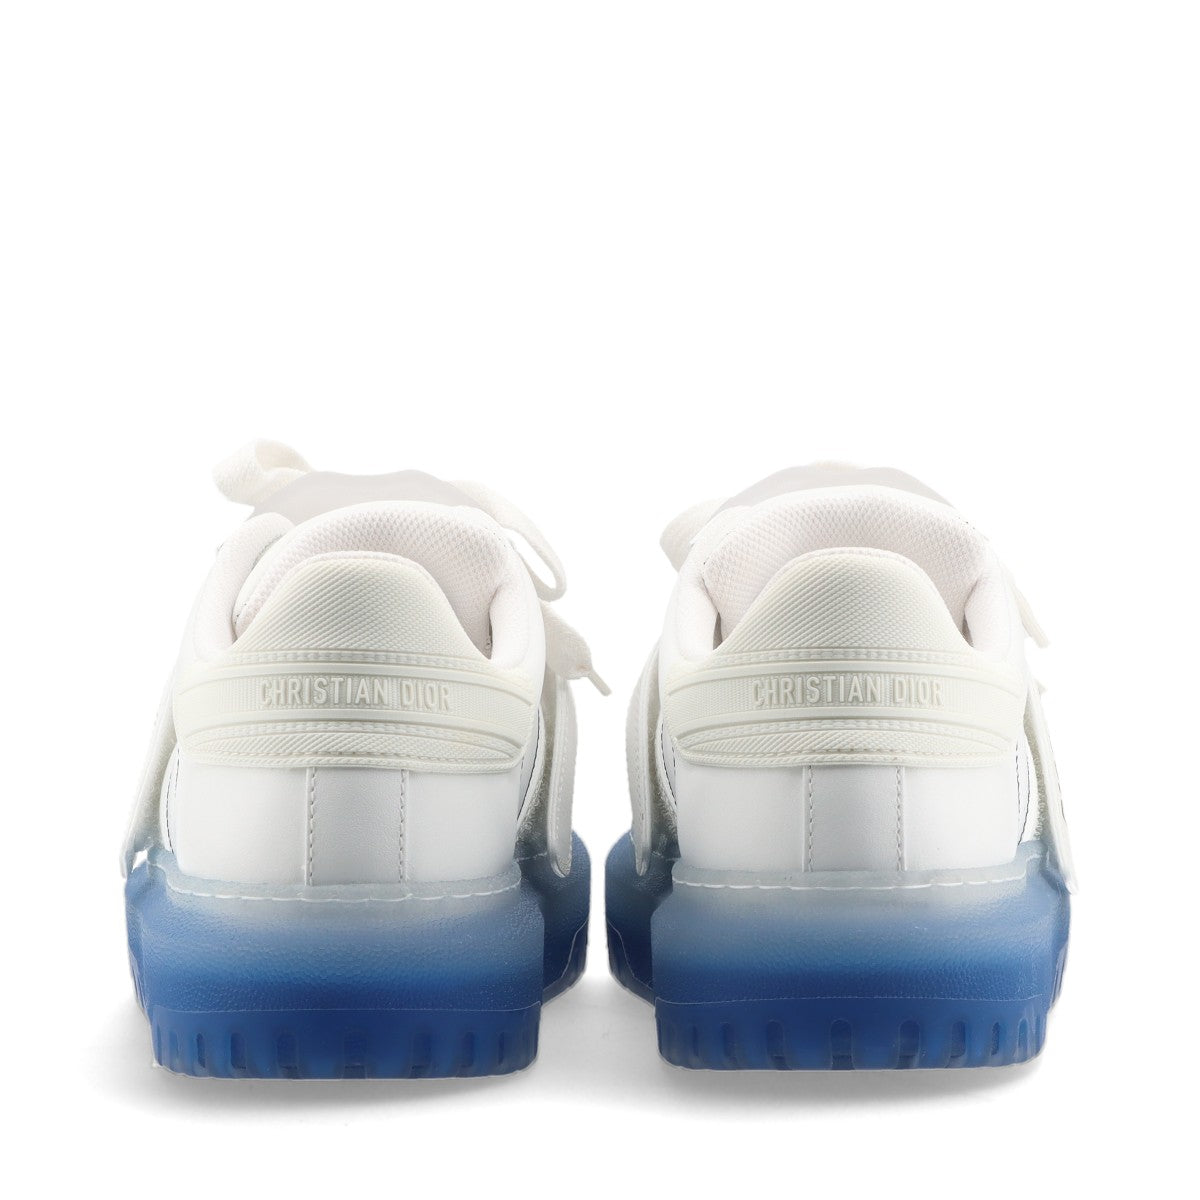 Chris Chandior DIOR-ID Leather  Laver Trainers 36.5  Blue × White Rement Rope  Bag